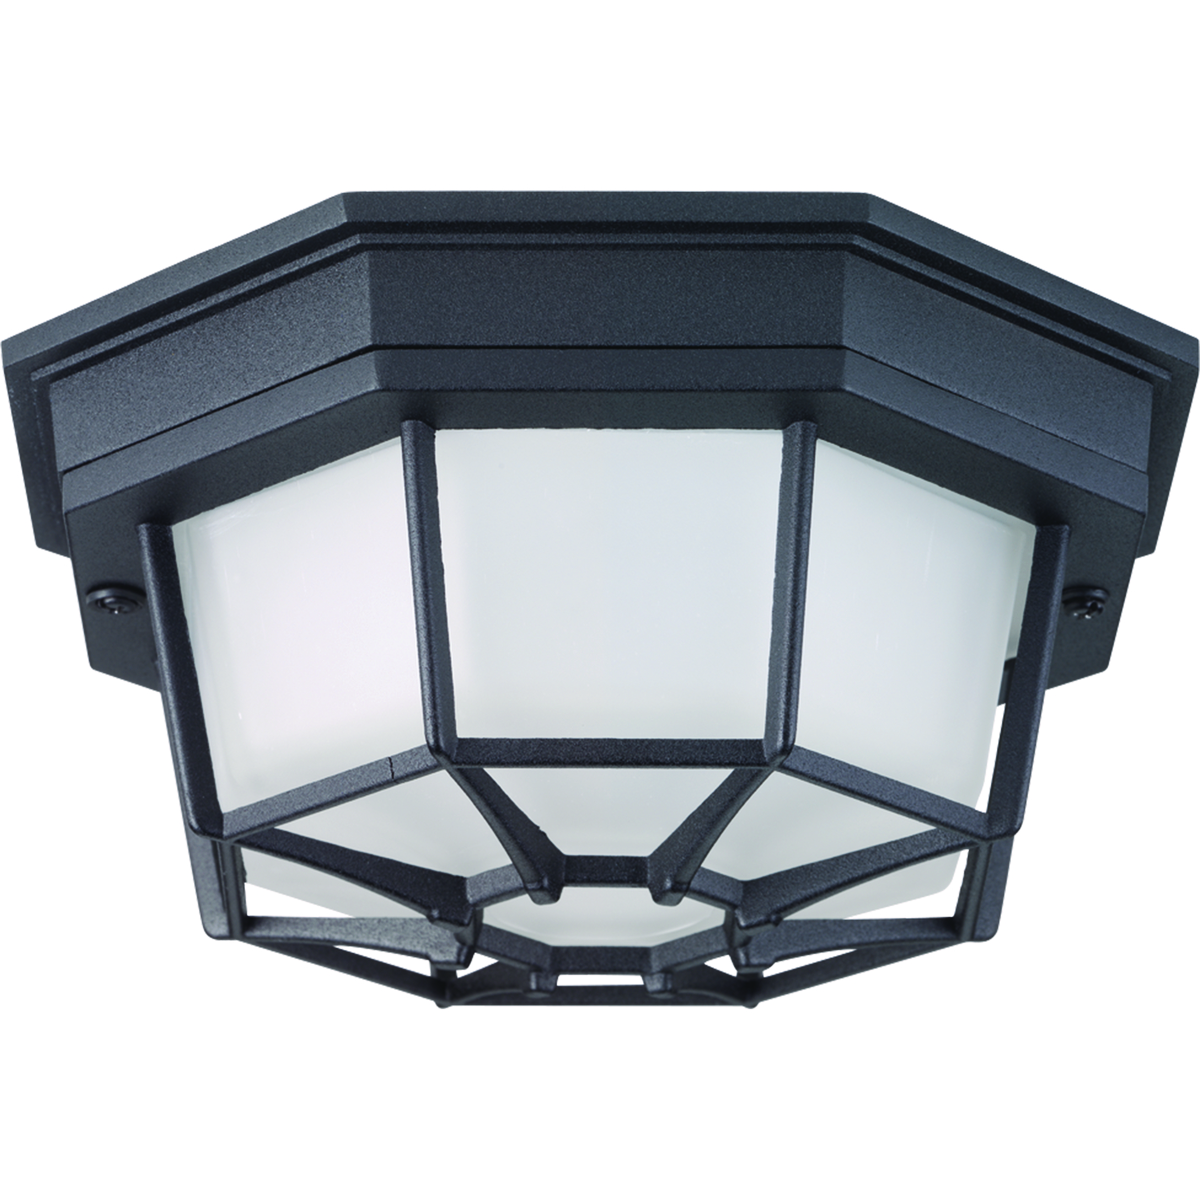 One-light 8-3/8 in LED flush mount with etched glass surrounded by a die-cast aluminum frame. Ideal for indoor and outdoor applications. Black finish.